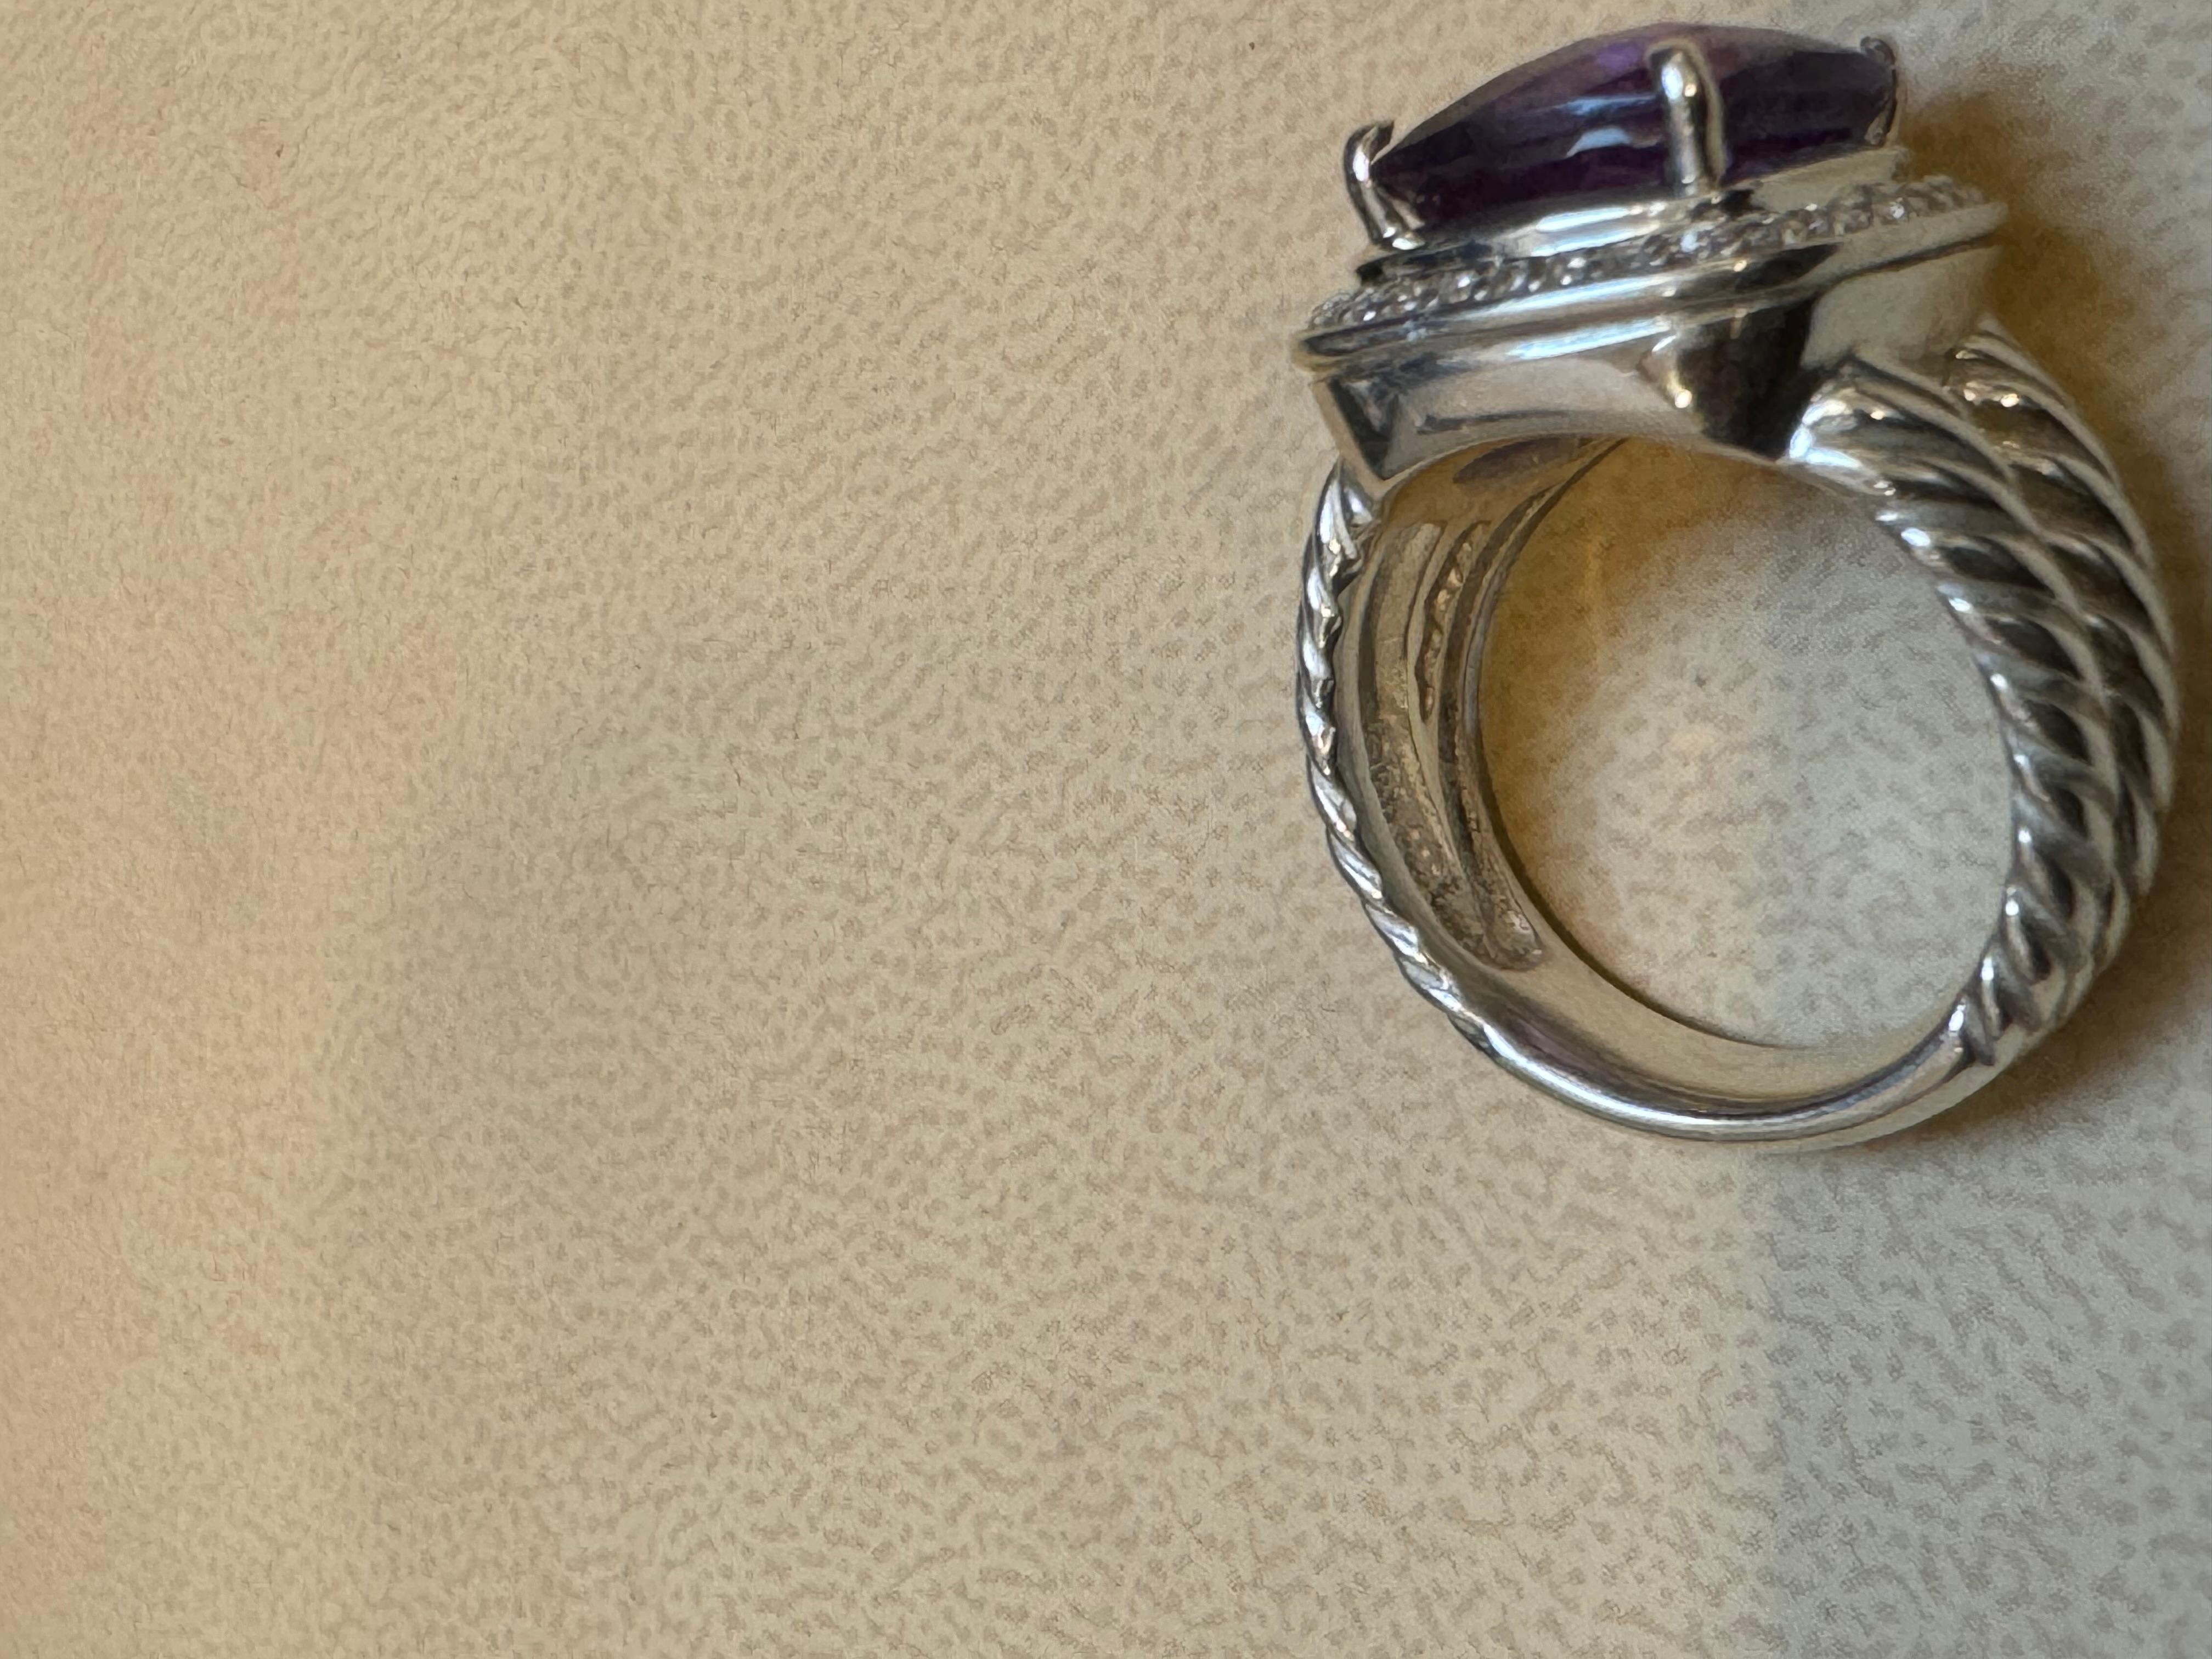 Estate DAVID YURMAN Sterling Silver Amethyst Ring With  Diamonds size 7 For Sale 3